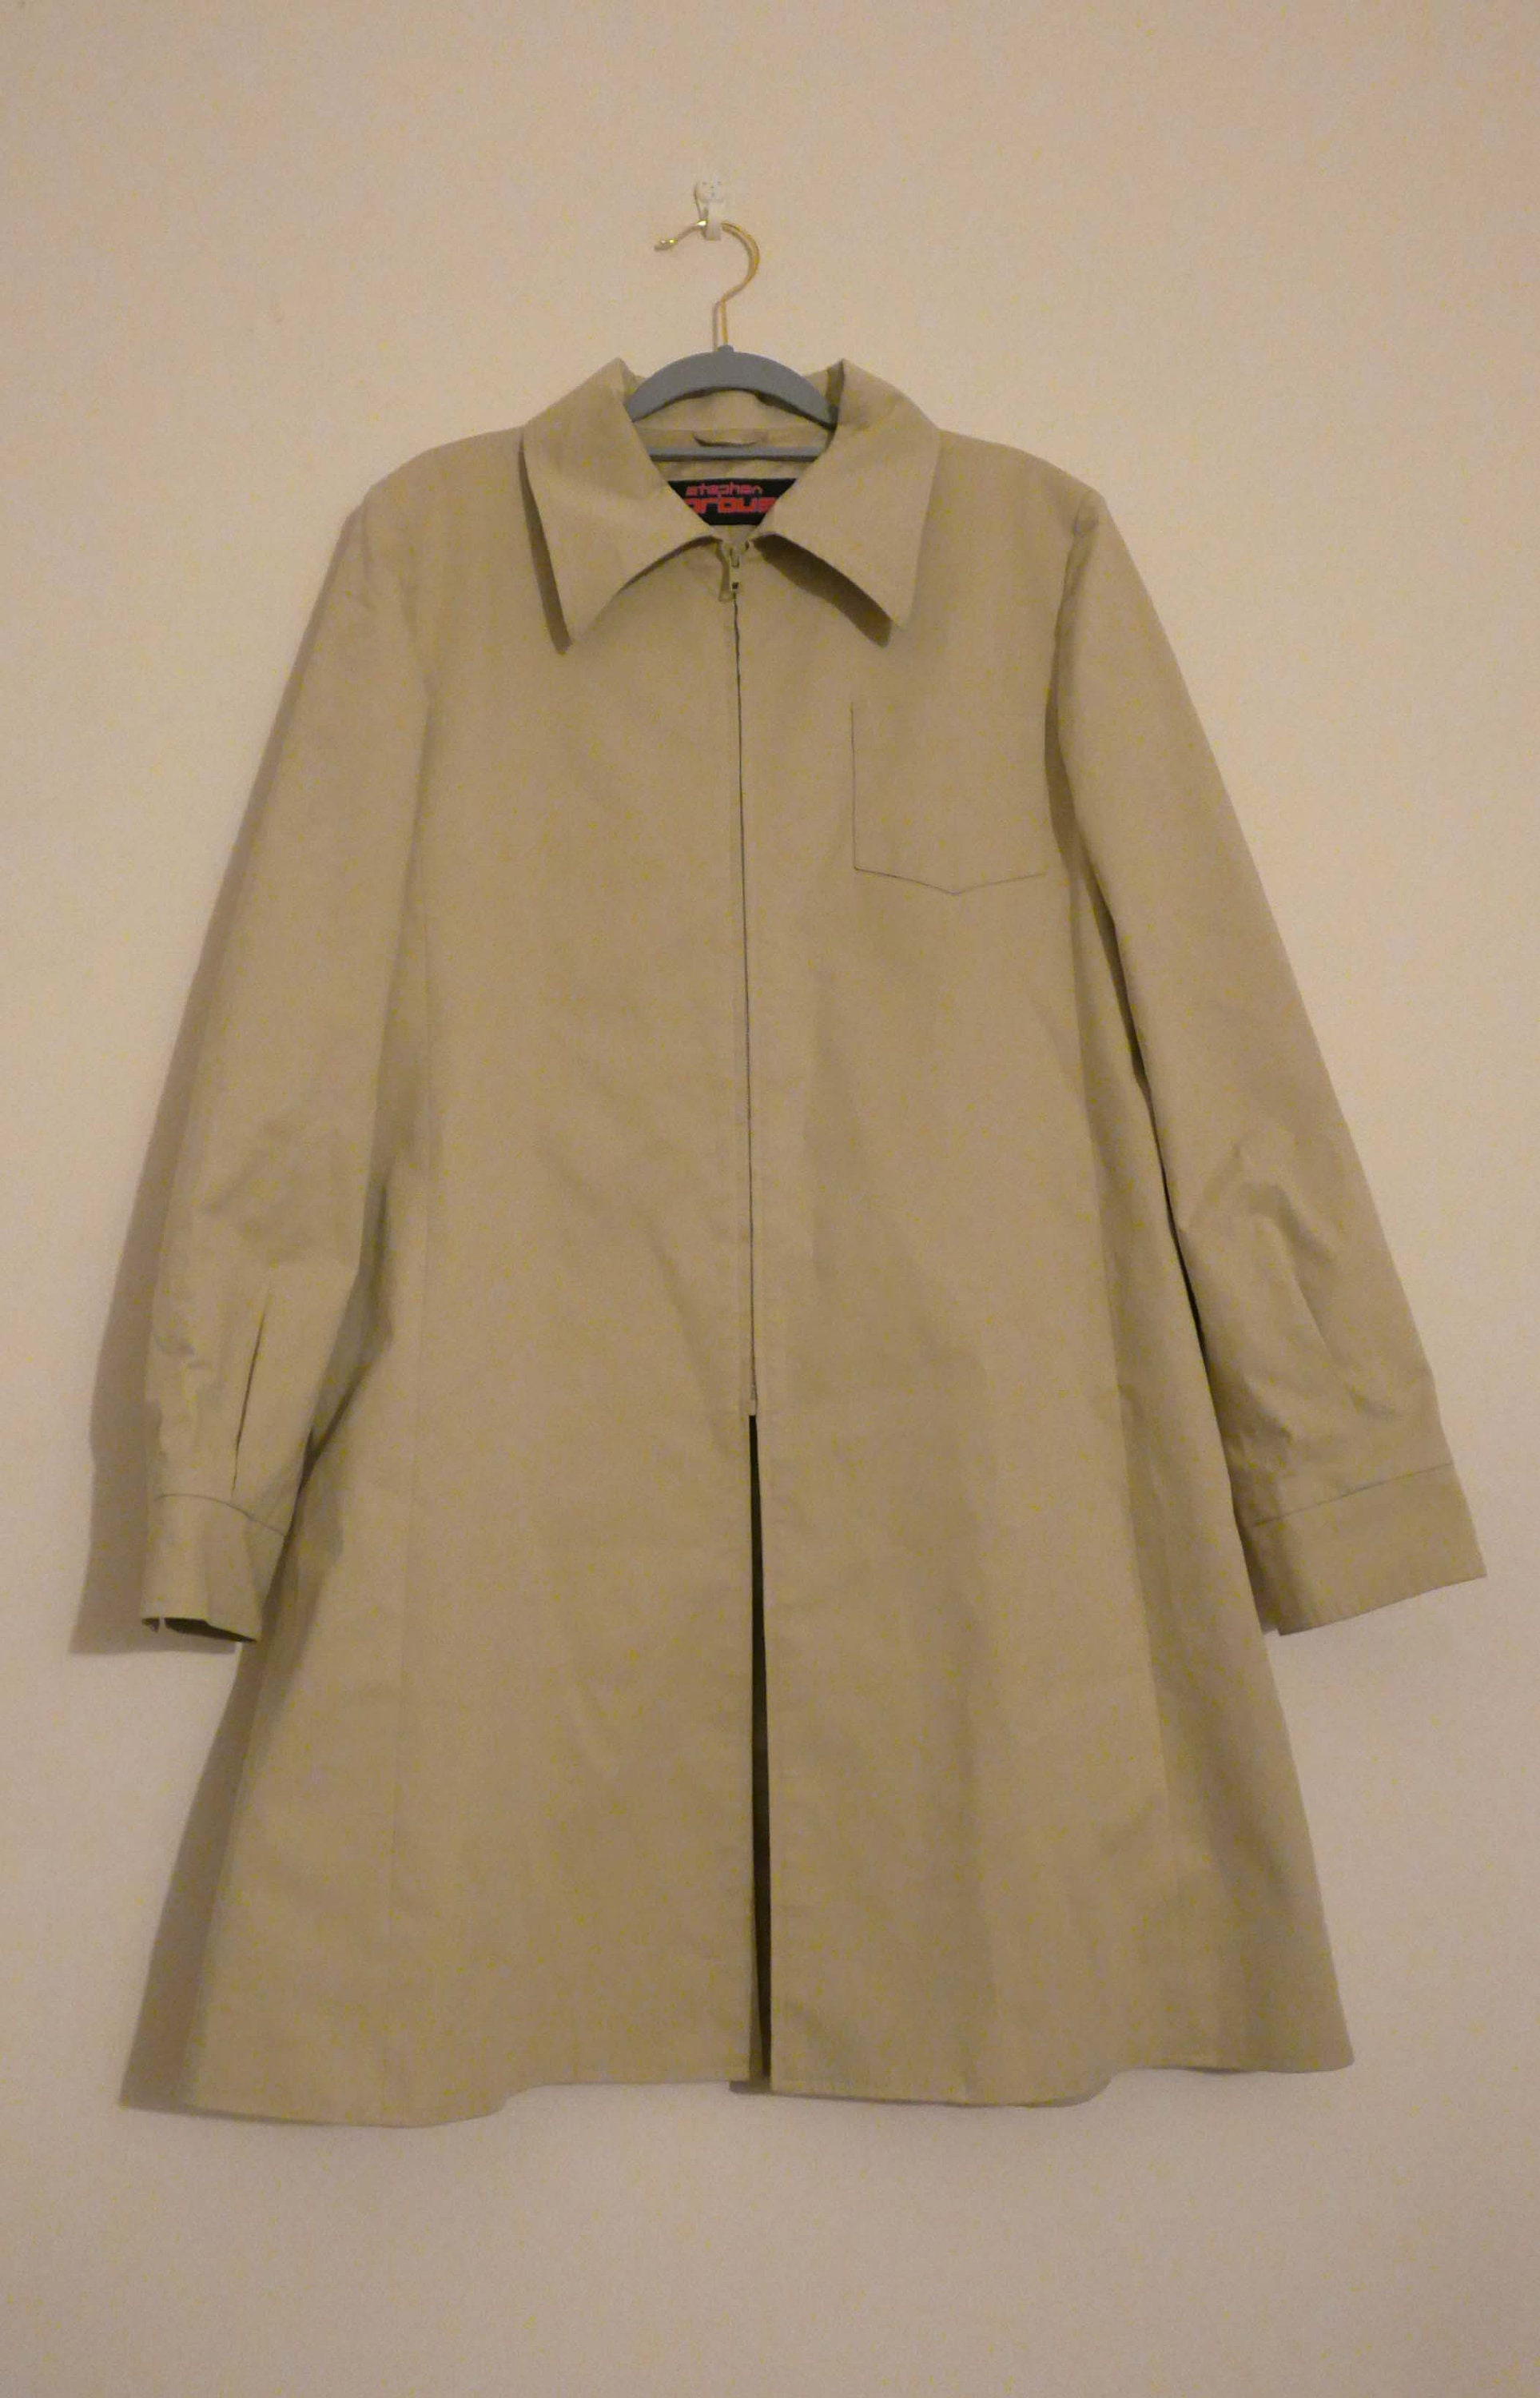 Stephen Sprouse Vintage Oversize Trench Coat, $3,714, farfetch.com